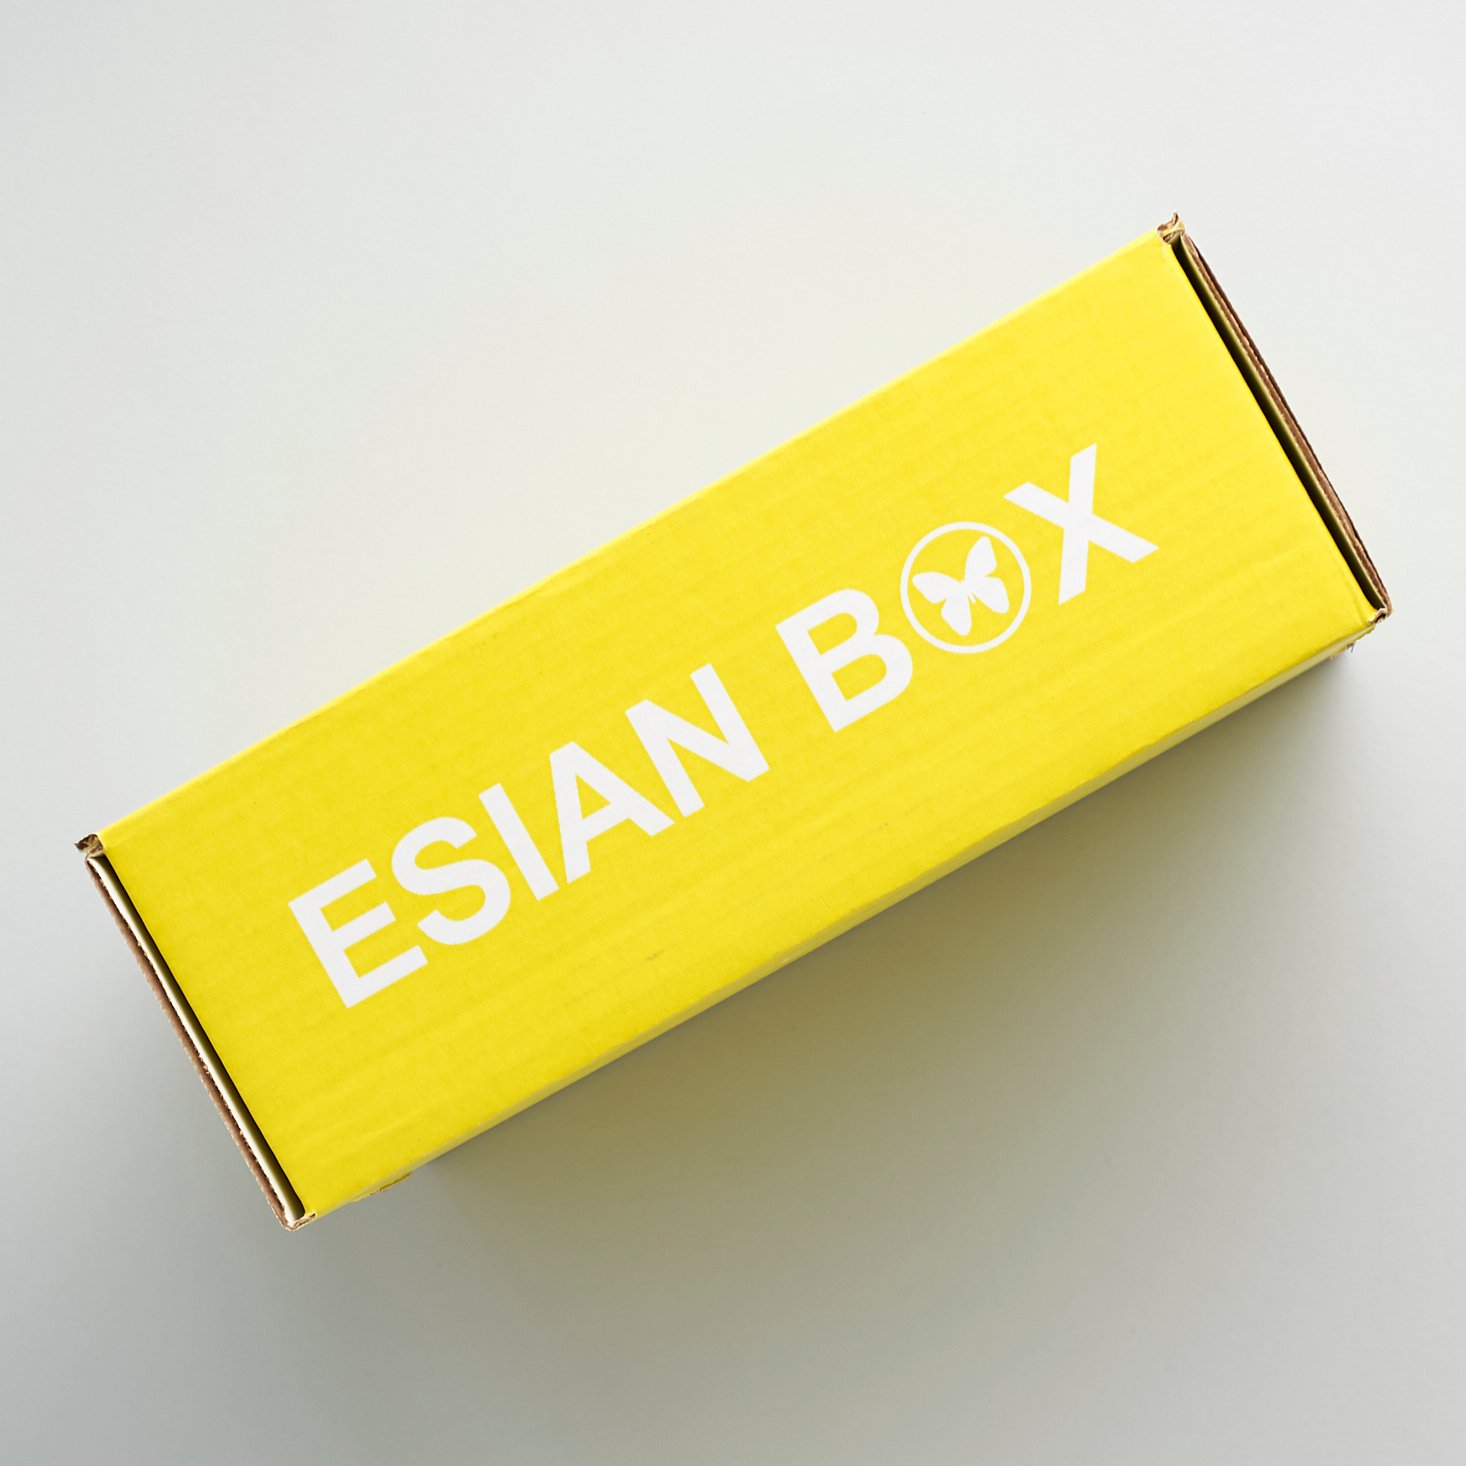 EsianMall SnackBox Subscription Review + Coupon- February 2017